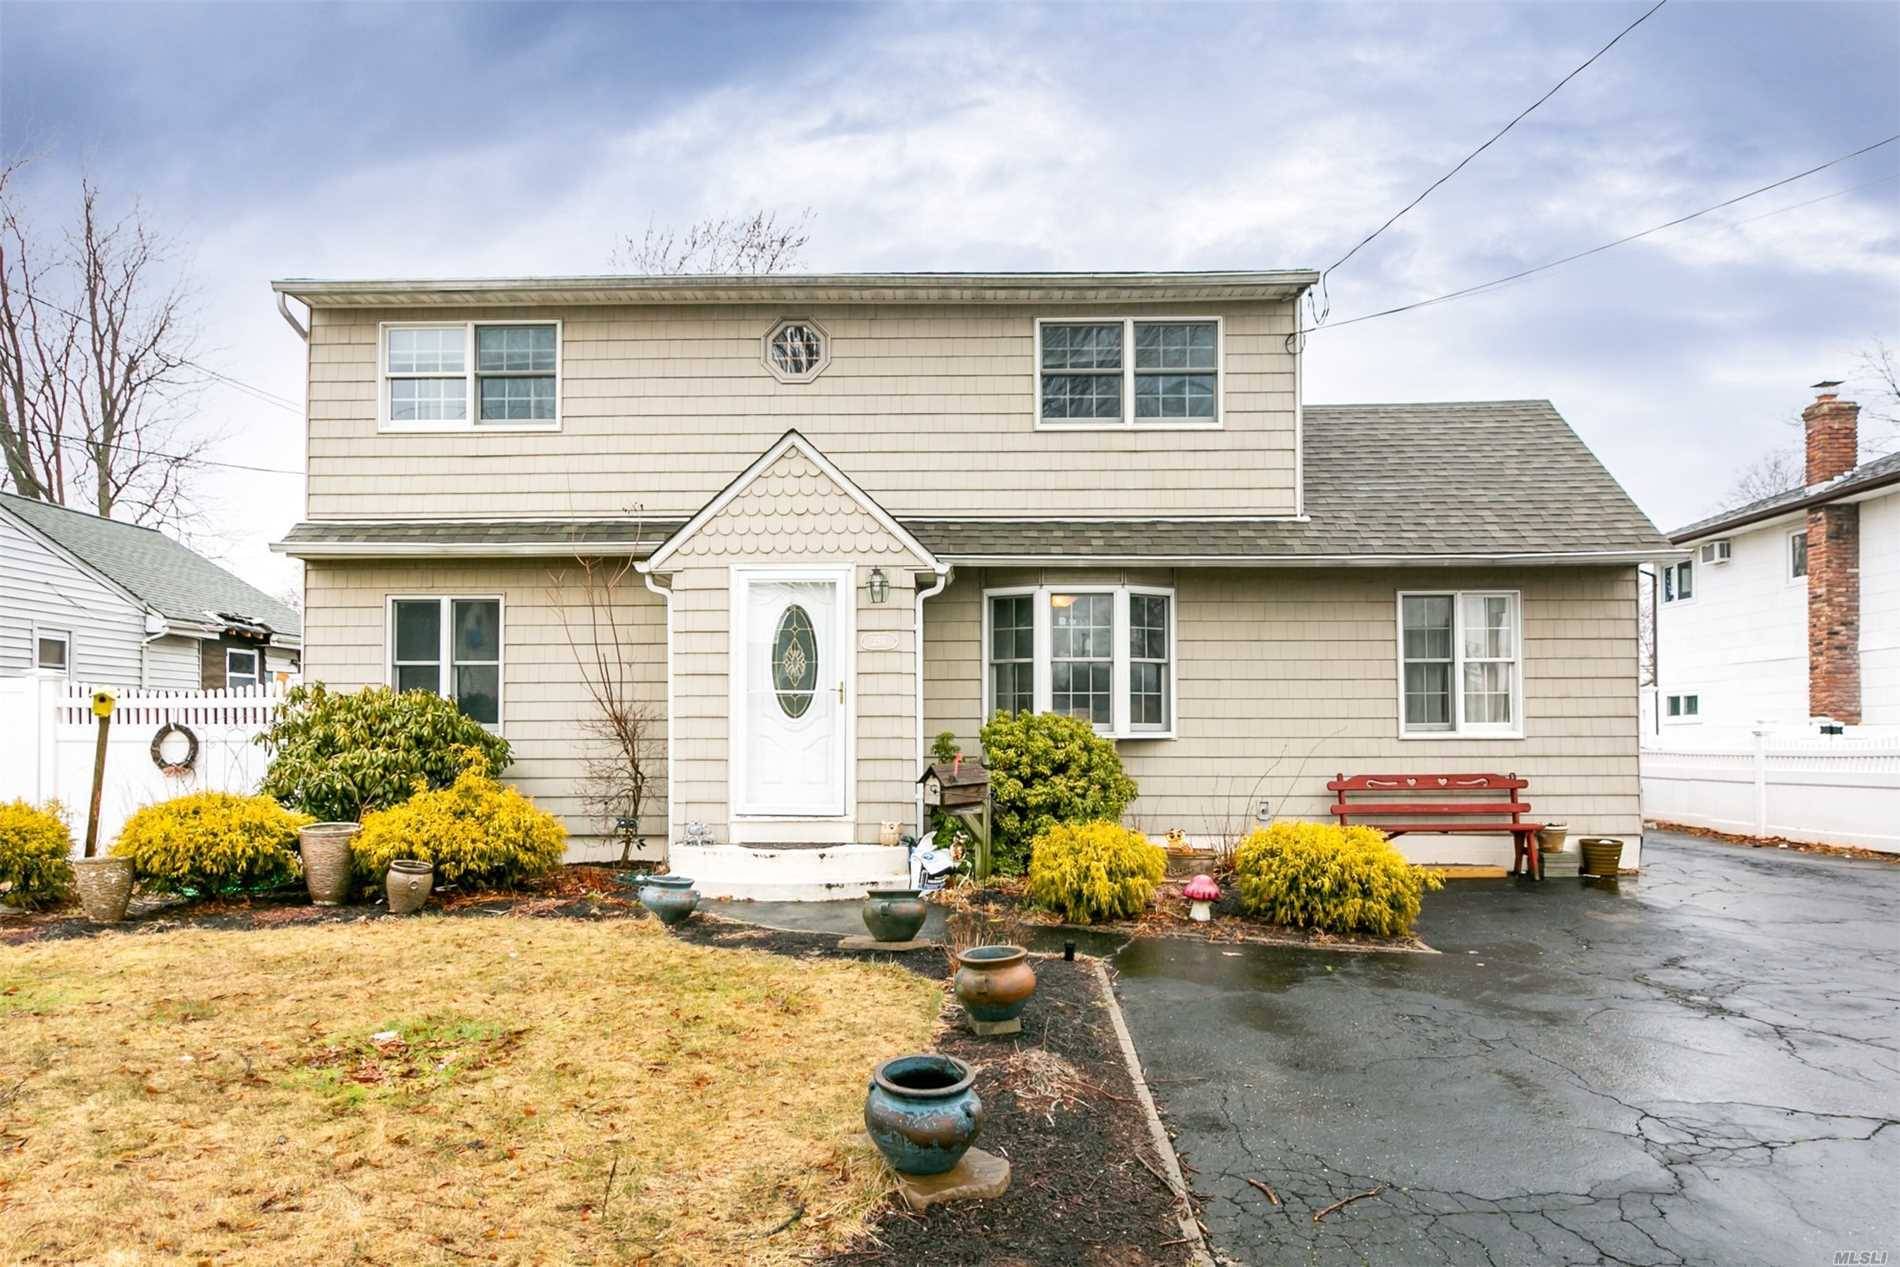 Lovely Expanded Cape In The Village Of Lindenhurst Featuring A Huge Master BR, 3 Other BRs, 2 Full Baths, Wood Floors, Gas Heat, Huge Driveway, IGS, 2nd Floor Previously Had ...